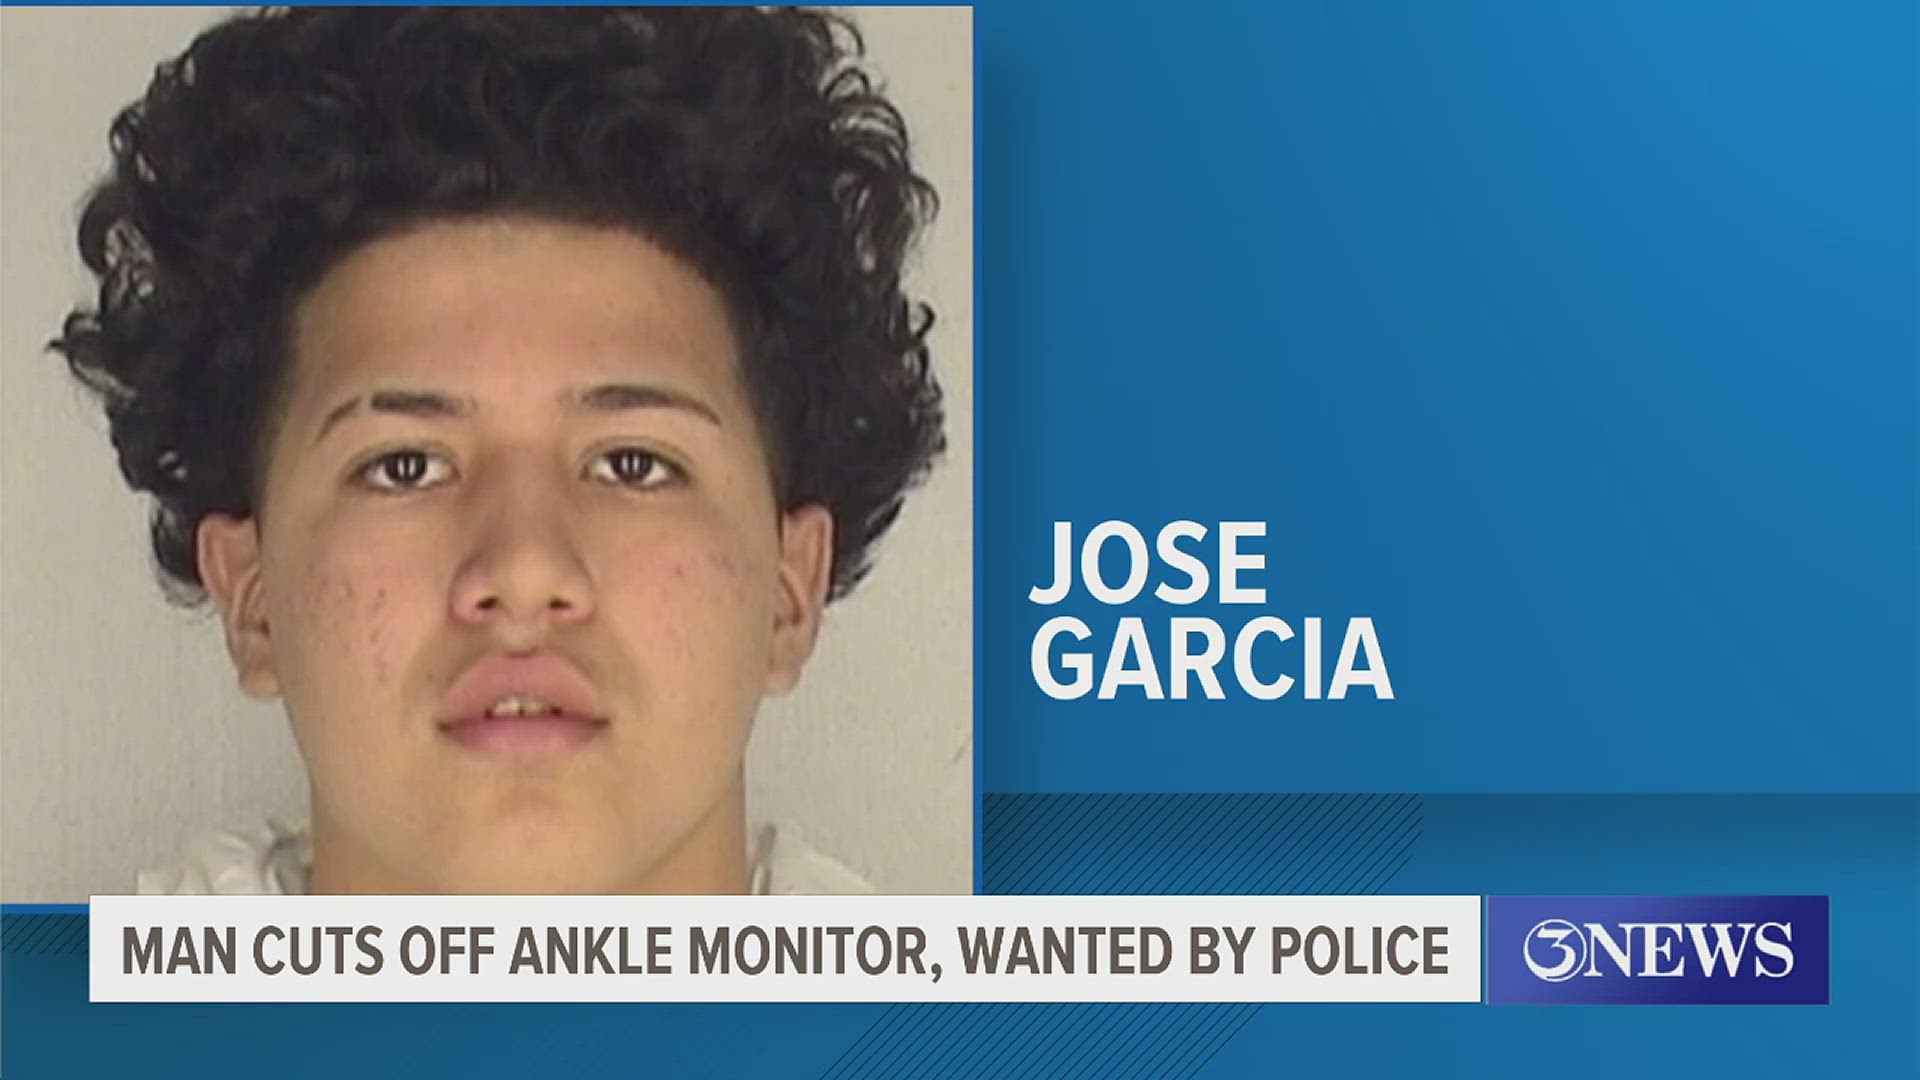 Jose Garcia, 20, is accused of shooting and killing 14-year-old Beatrice Nieto at the Indigo Apartments in 2020.